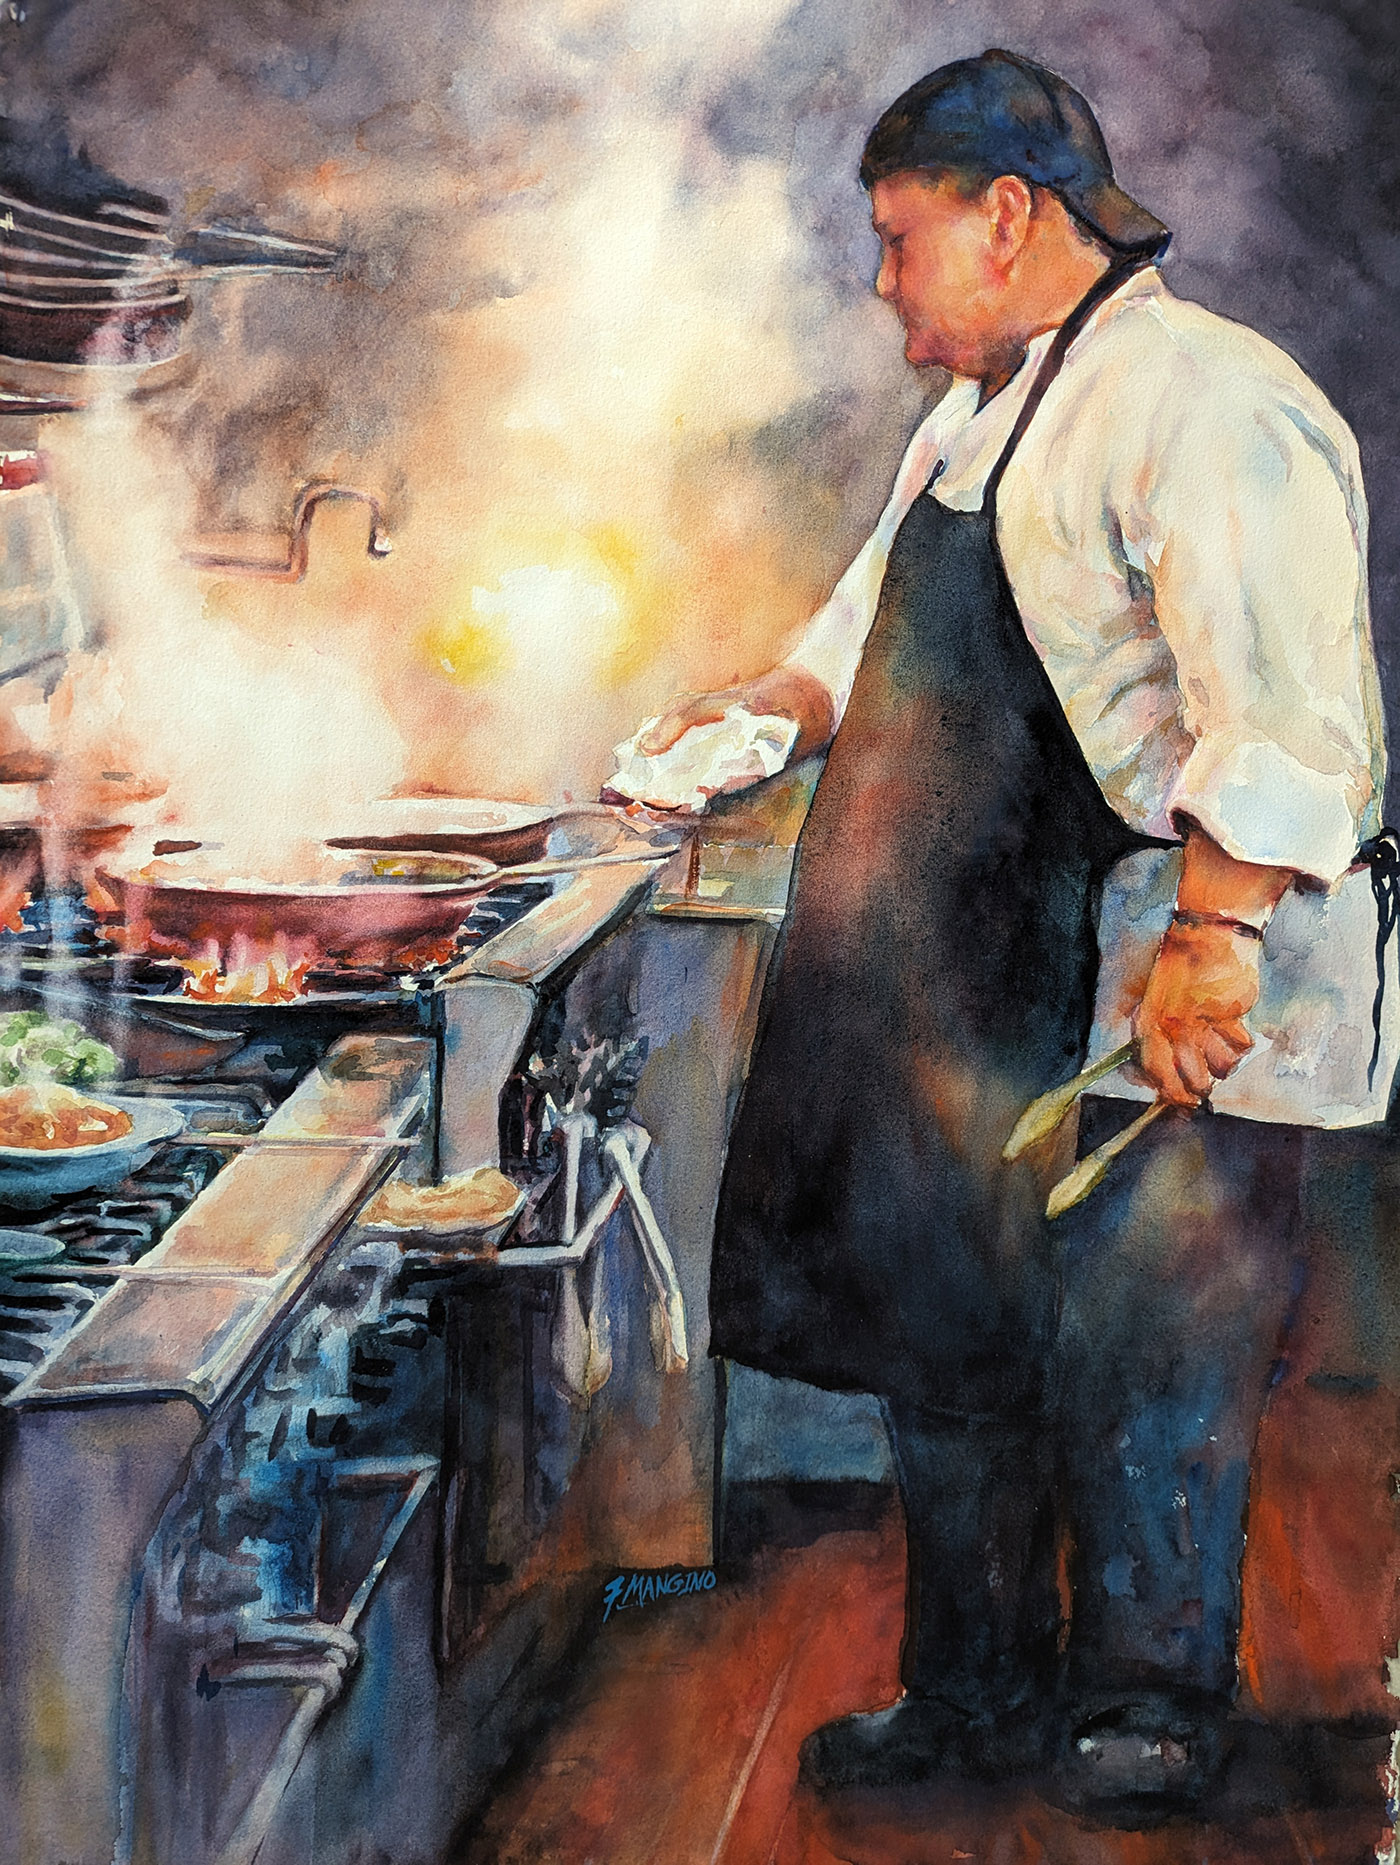 watercolor painting of chef cooking, steam coming from pan